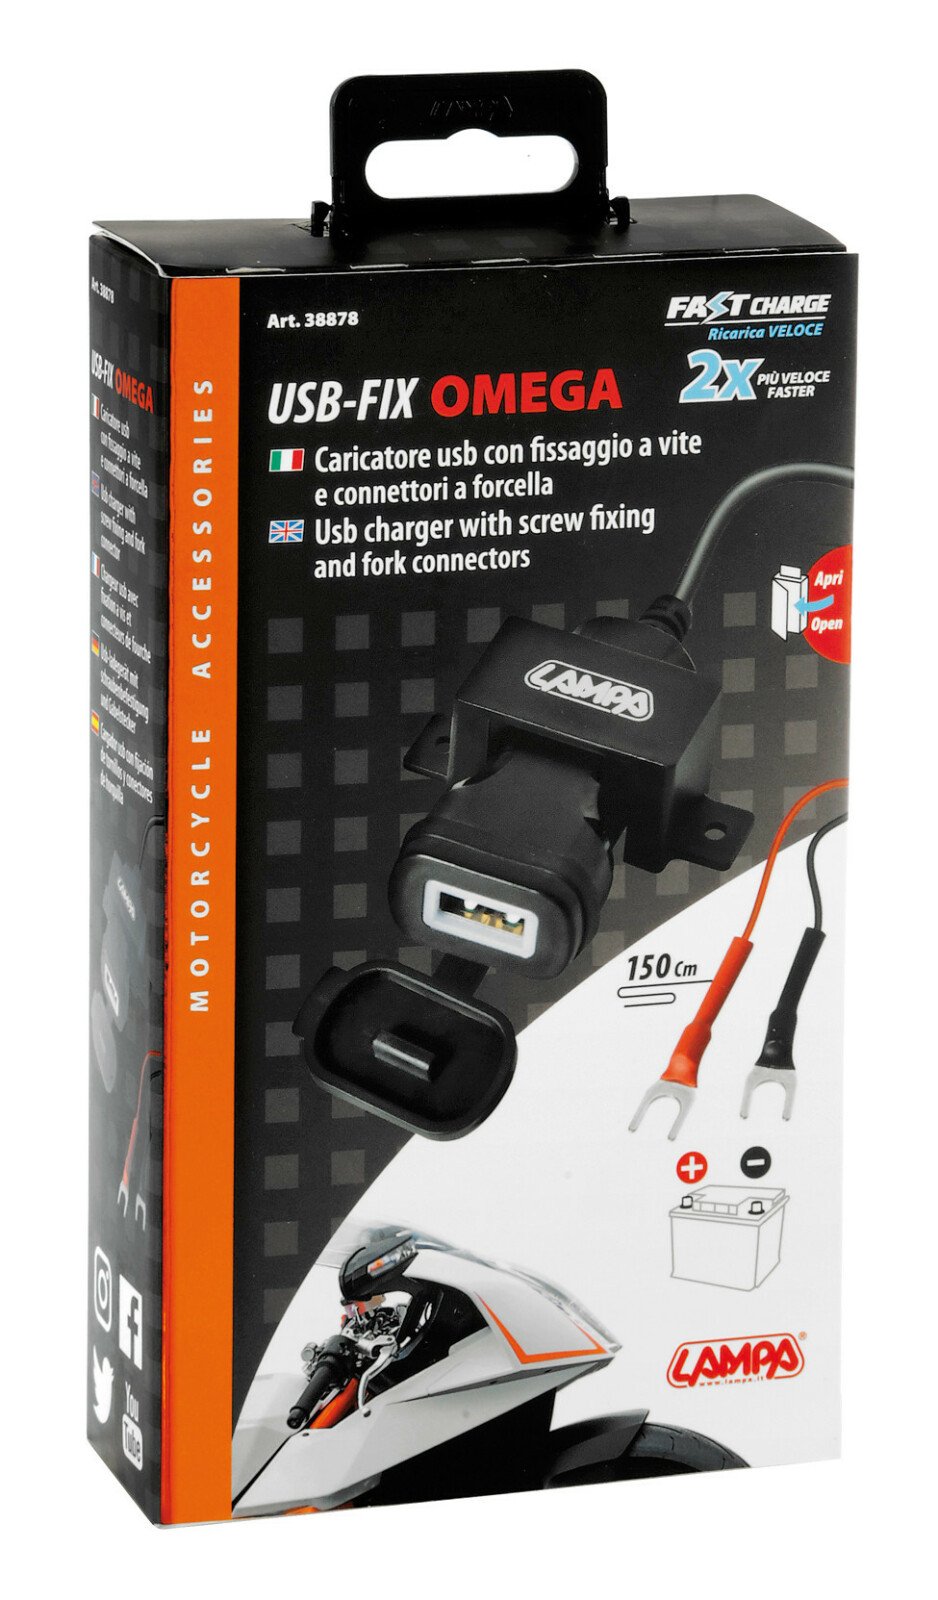 Usb Fix Omega, Usb charger with screw fixing and fork connectors - 12/24V thumb